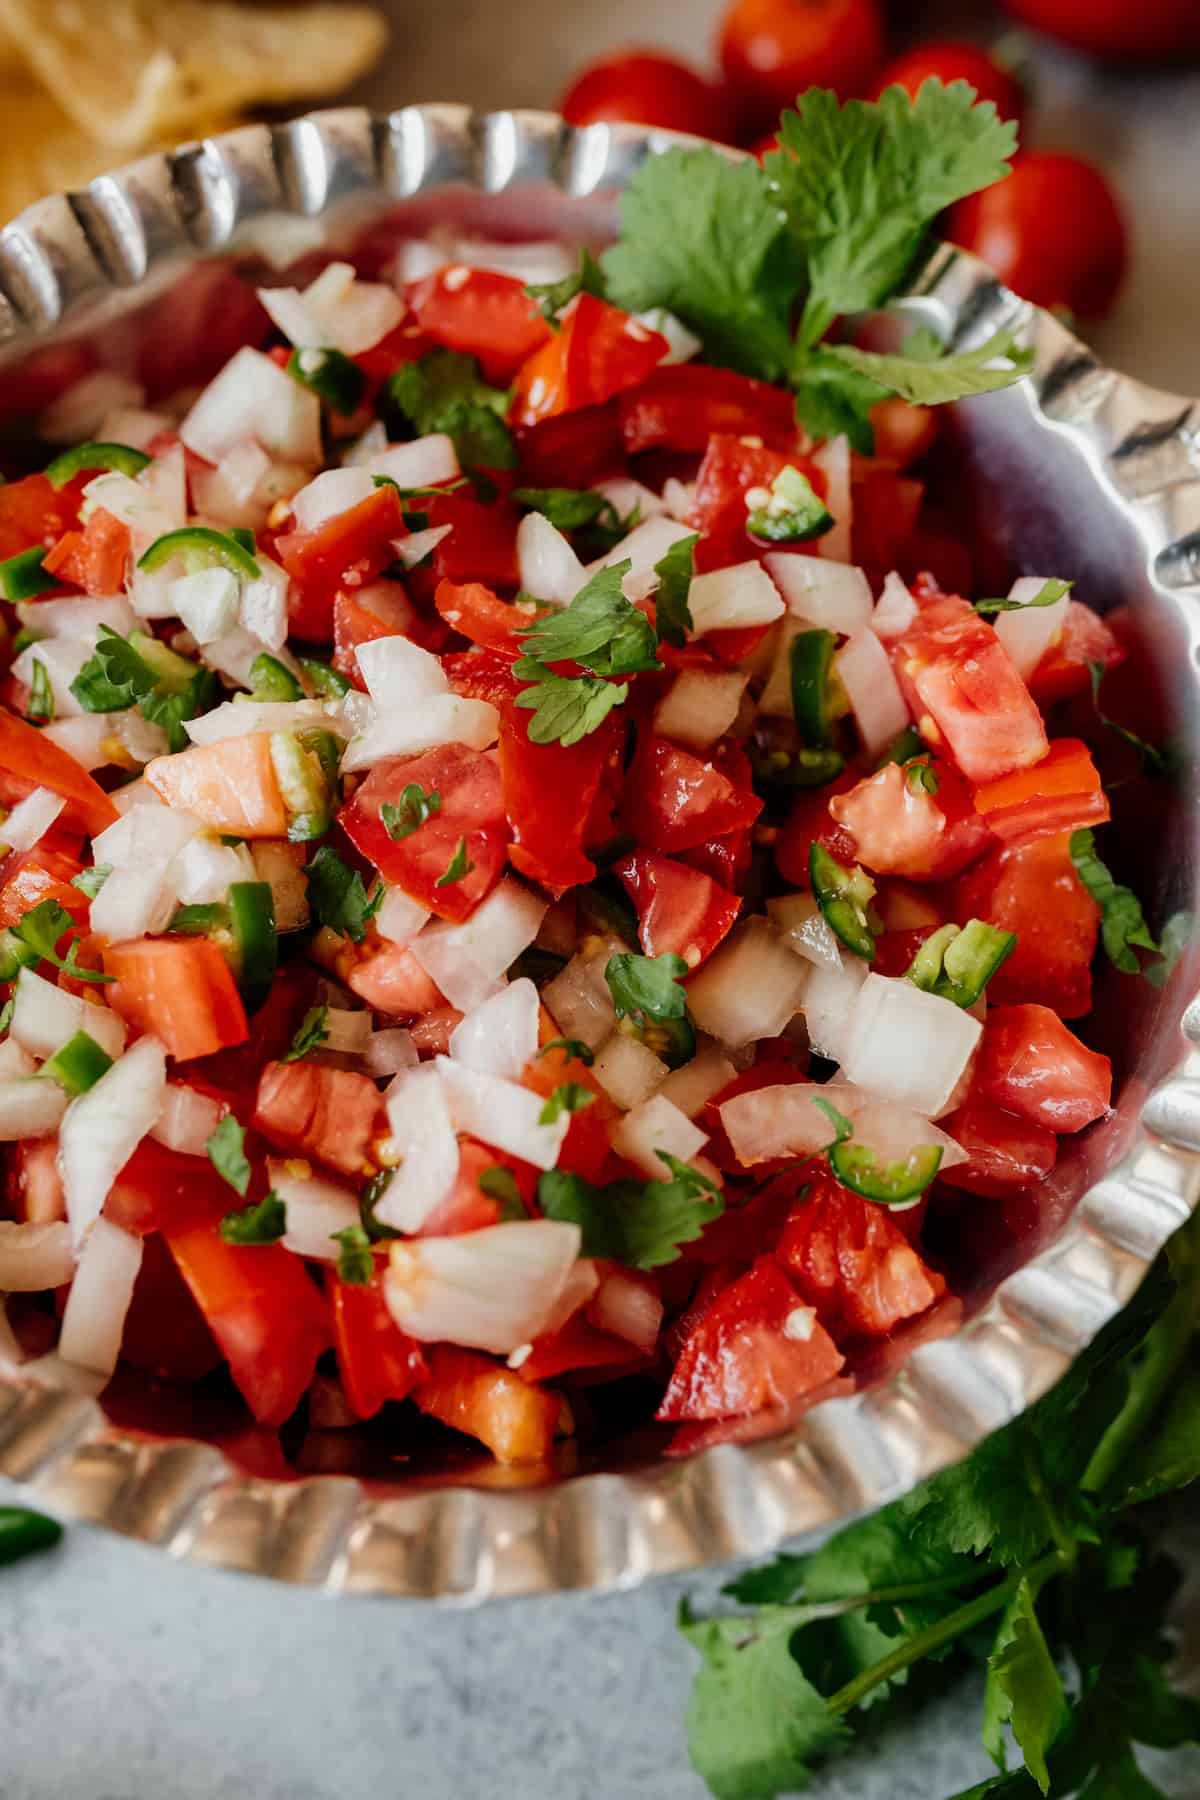 Close-up view of this simple pico de gallo, aka salsa bandera or chopped tomato salad, in a silver bowl to be served as an appetizer with tortilla chips